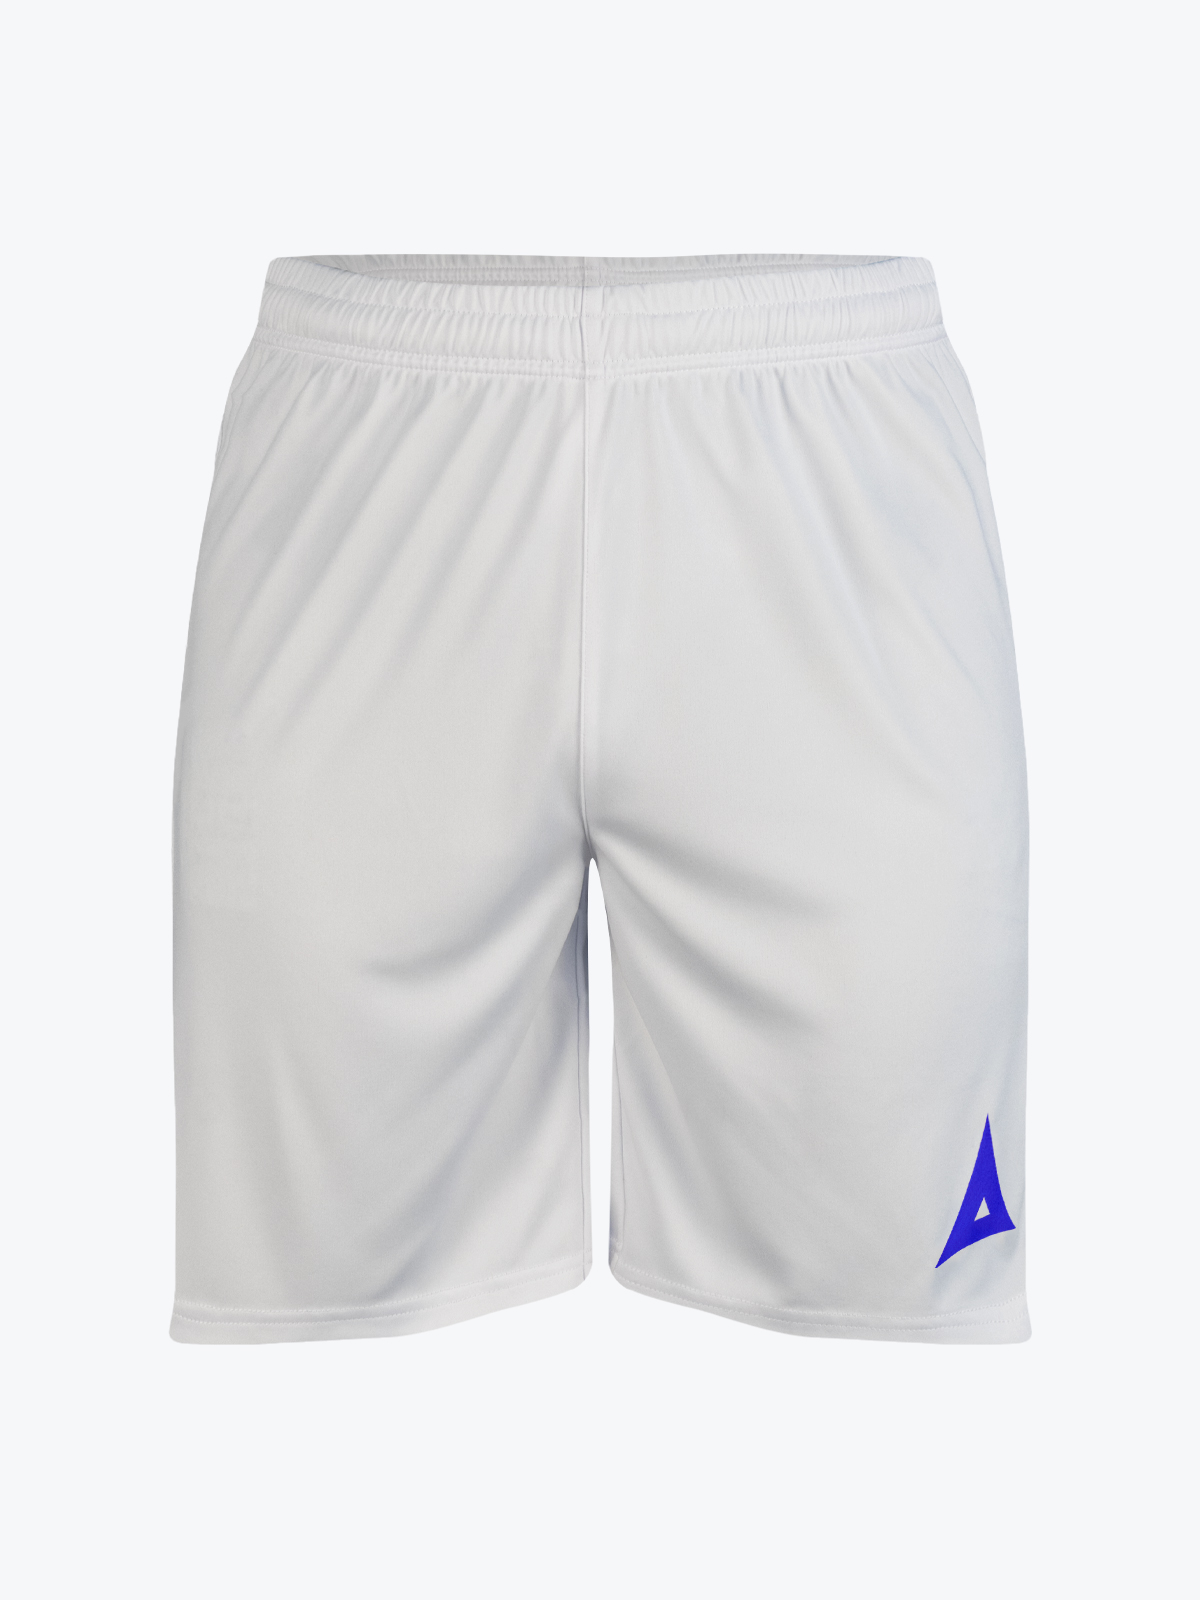 picture of focus 2 classic short - white/royal